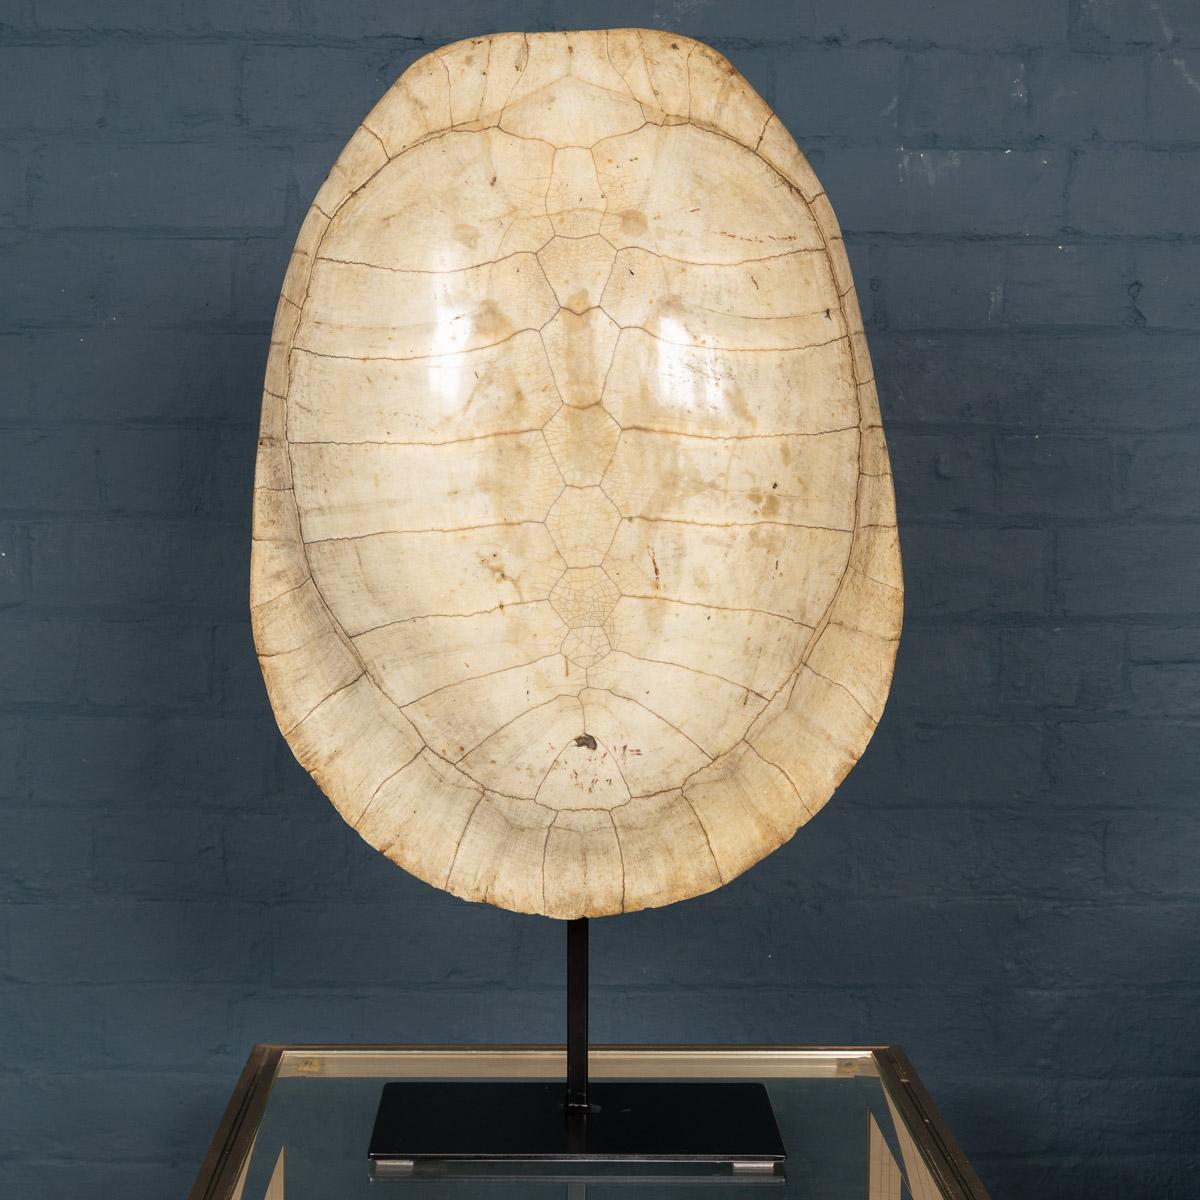 A stunning antique late 19th century “blond” turtle shell. These turtle shells were South American river turtles and would be captured to take on board the merchant ships of the 19th century. The turtles were then boiled (to make turtle soup) and